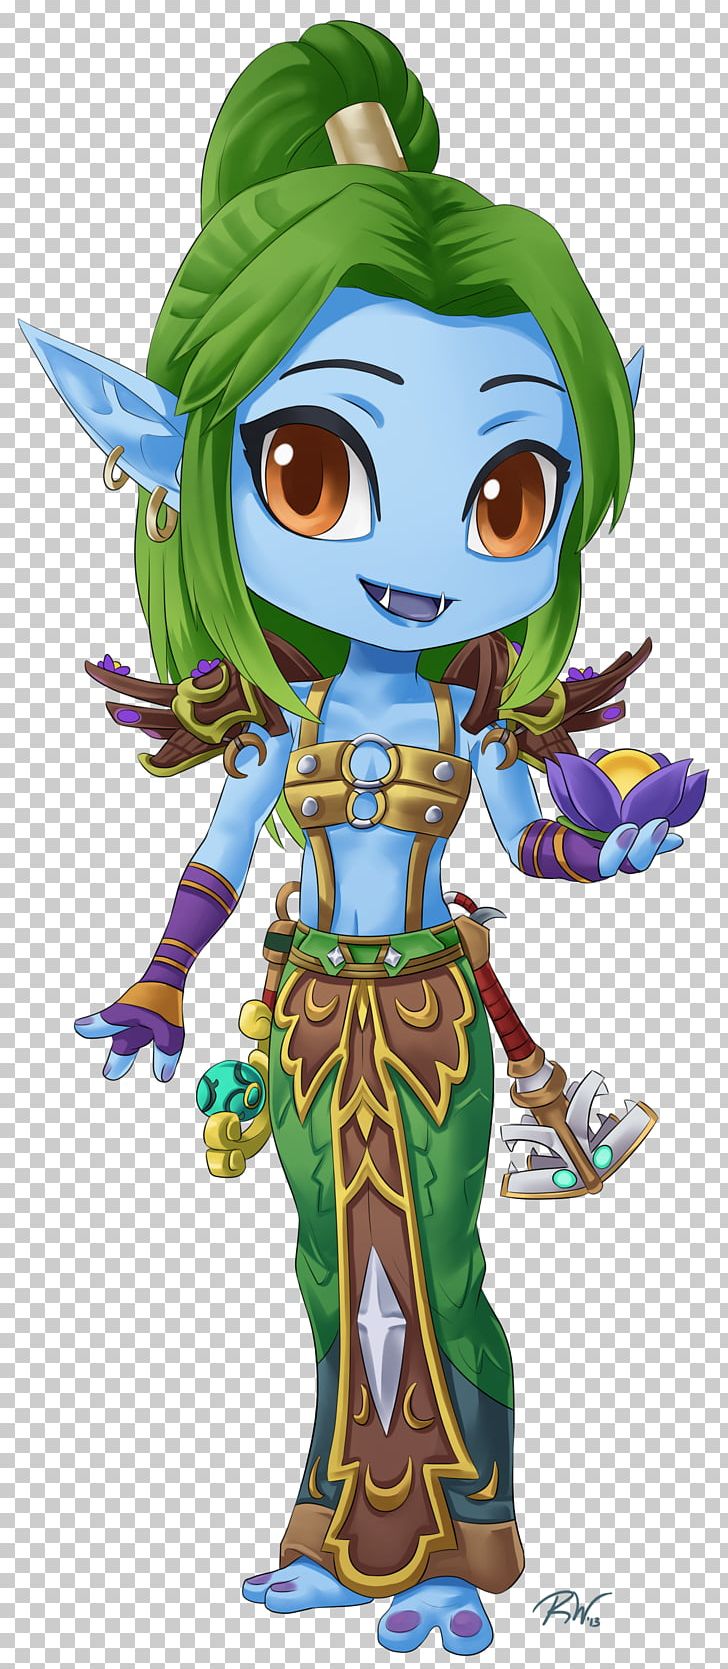 World Of Warcraft: Battle For Azeroth Druid Art Goblin PNG, Clipart, Anime, Art, Cartoon, Chibi, Costume Design Free PNG Download